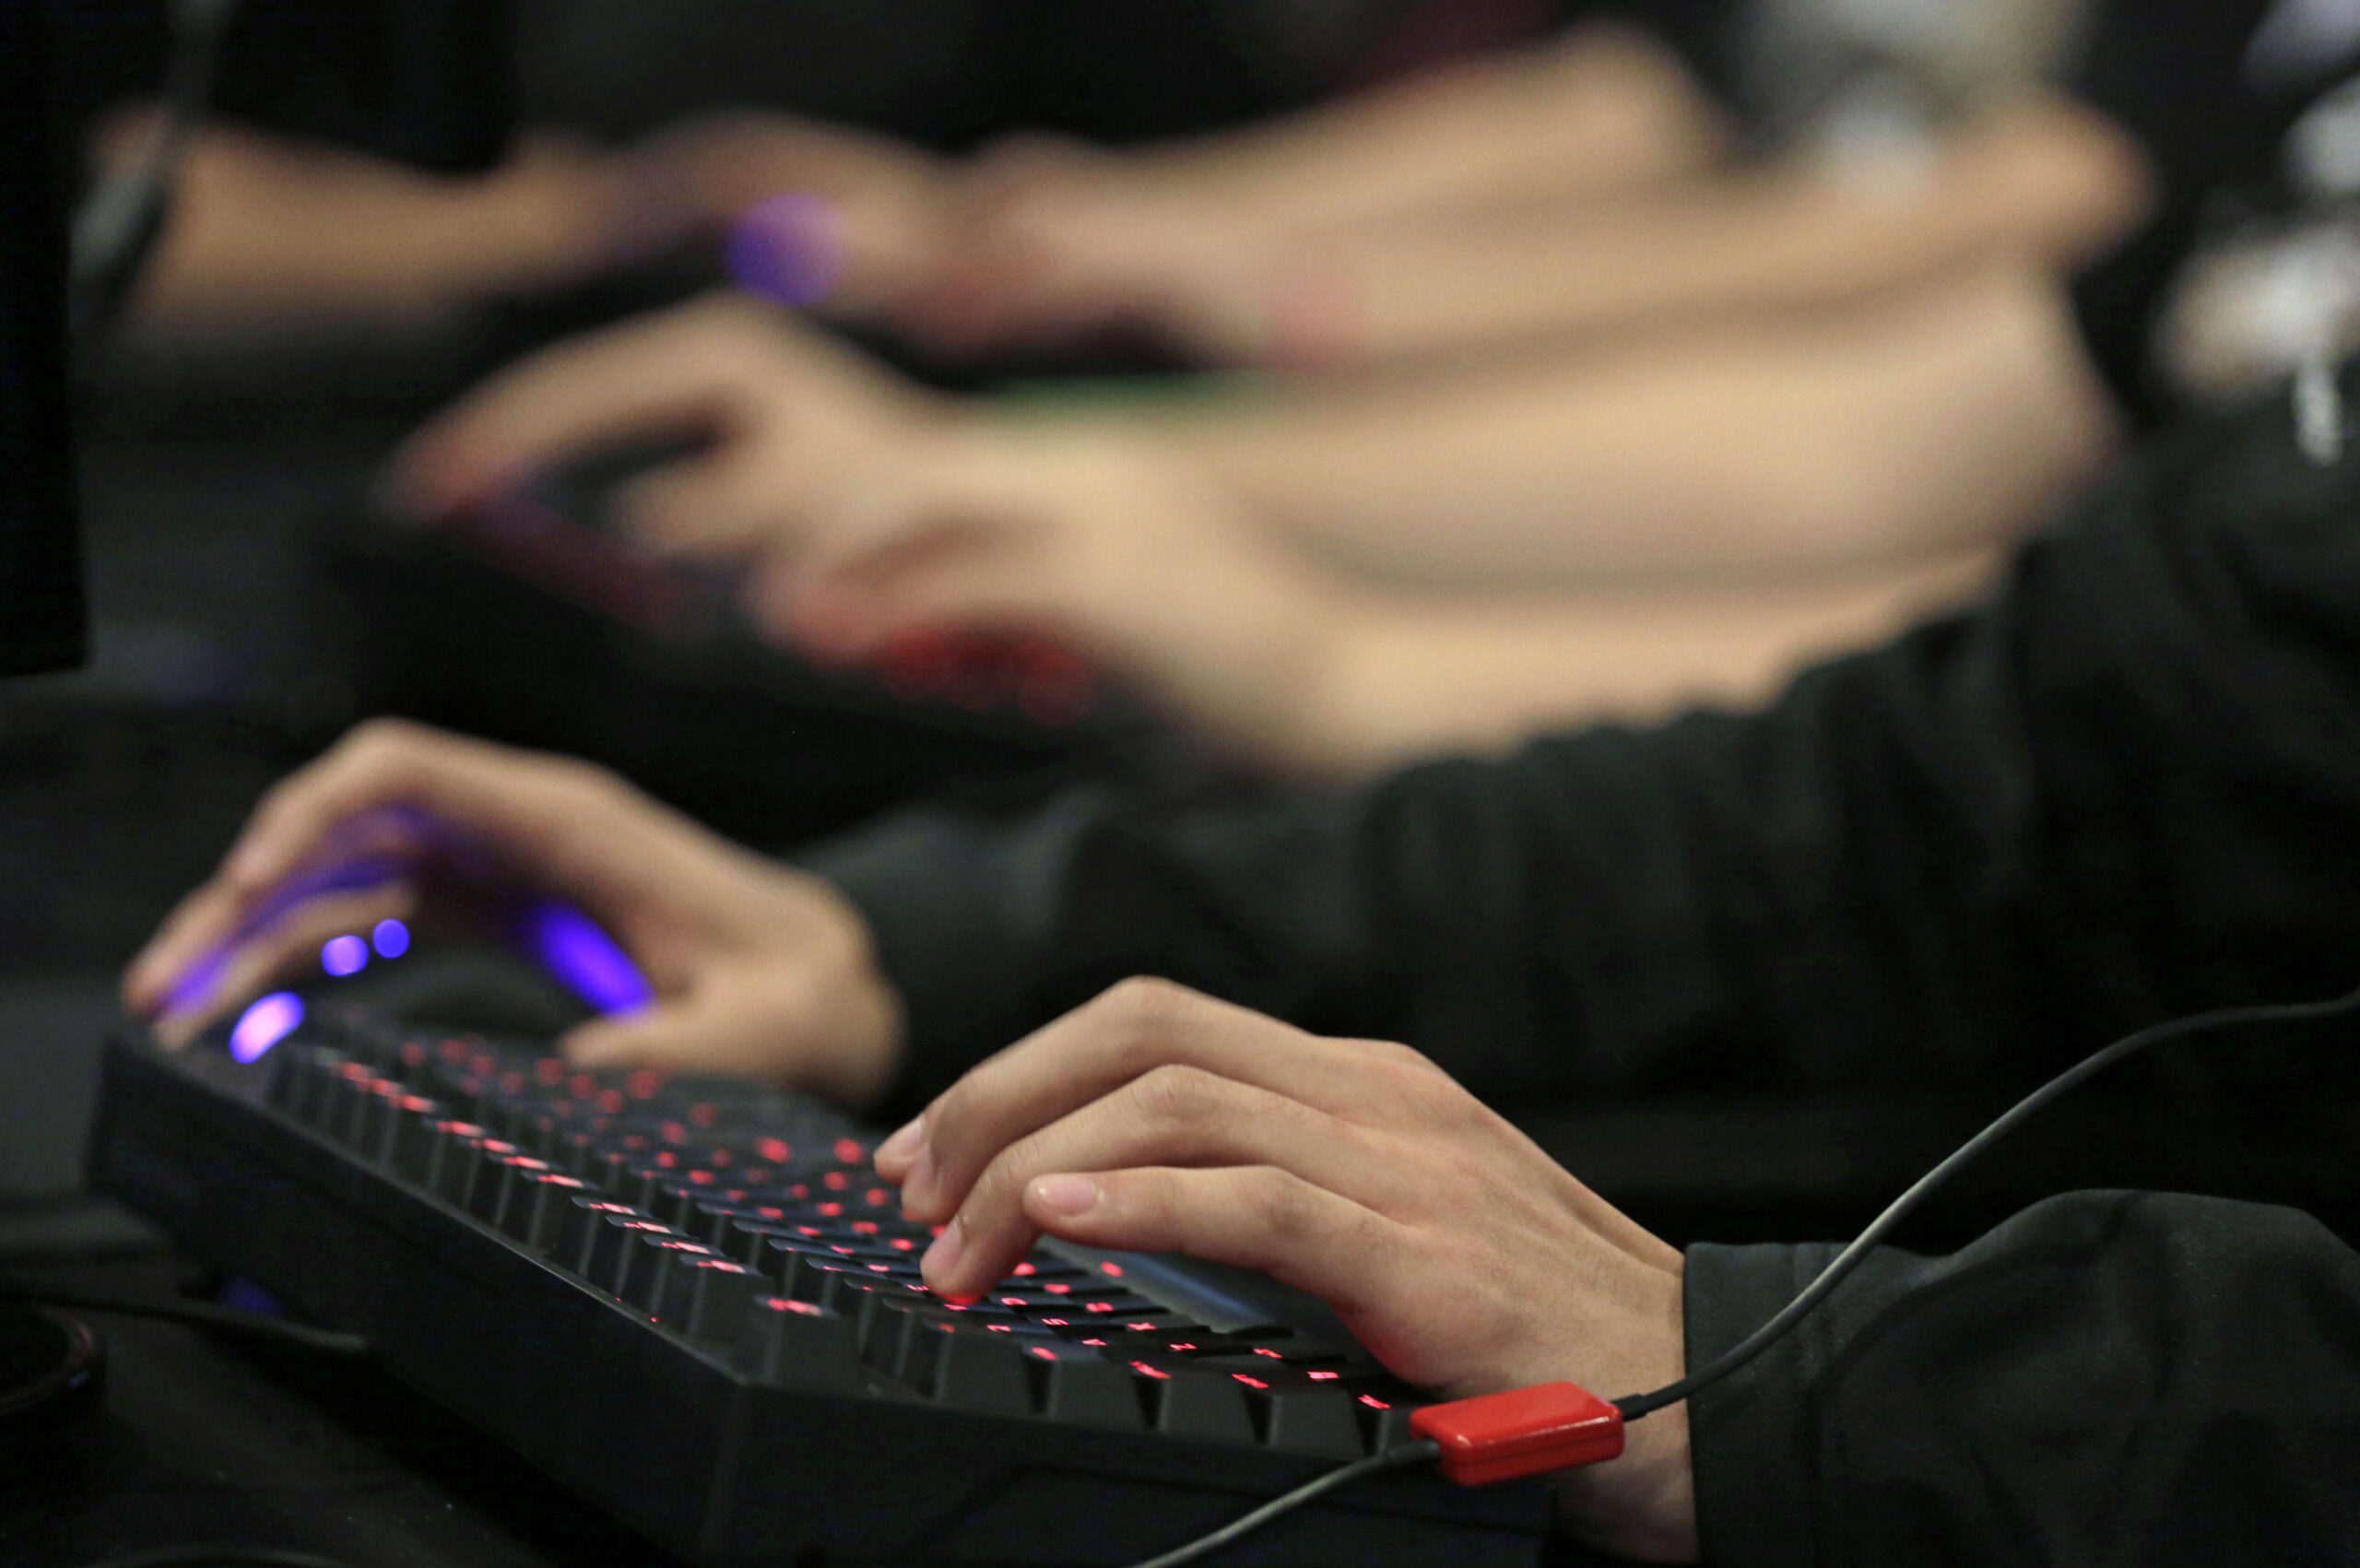 Hands are shown at a keyboard, playing a video game